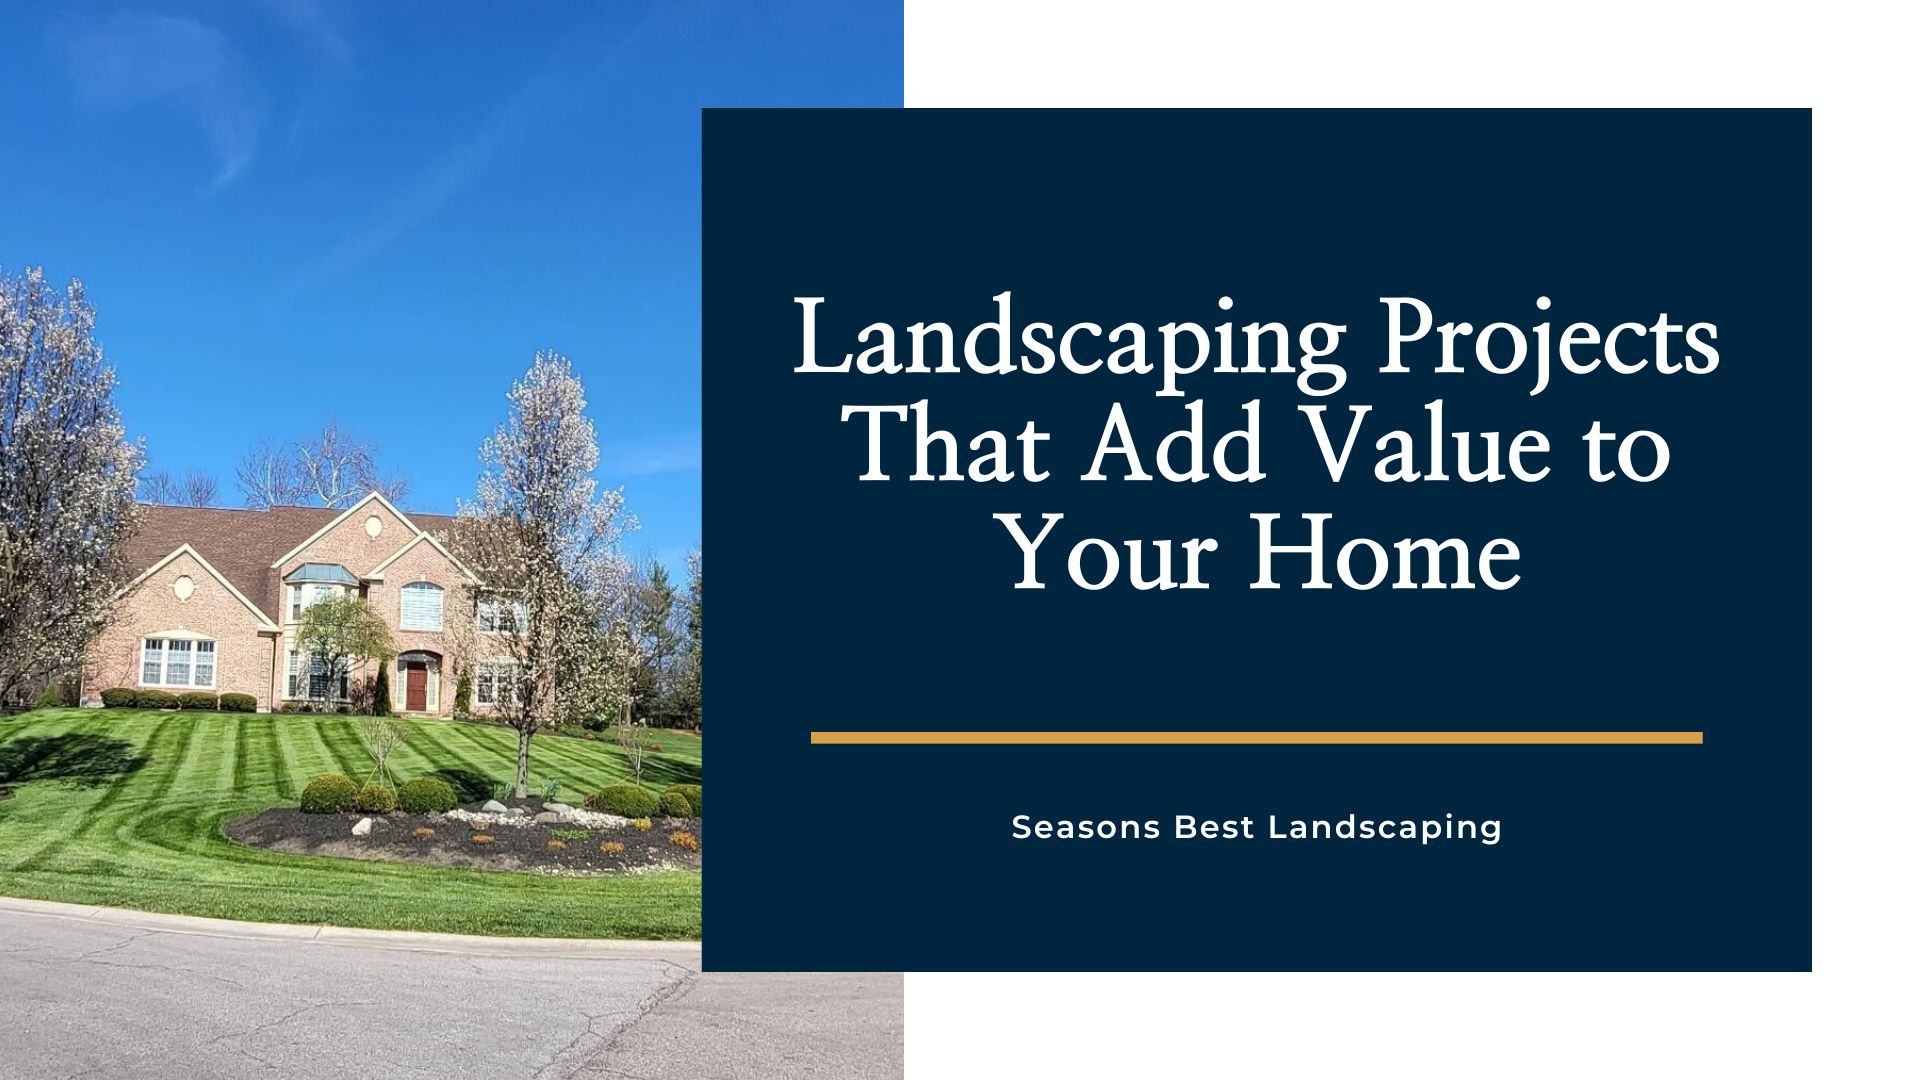 Landscaping to Increase Property Value for Your Home